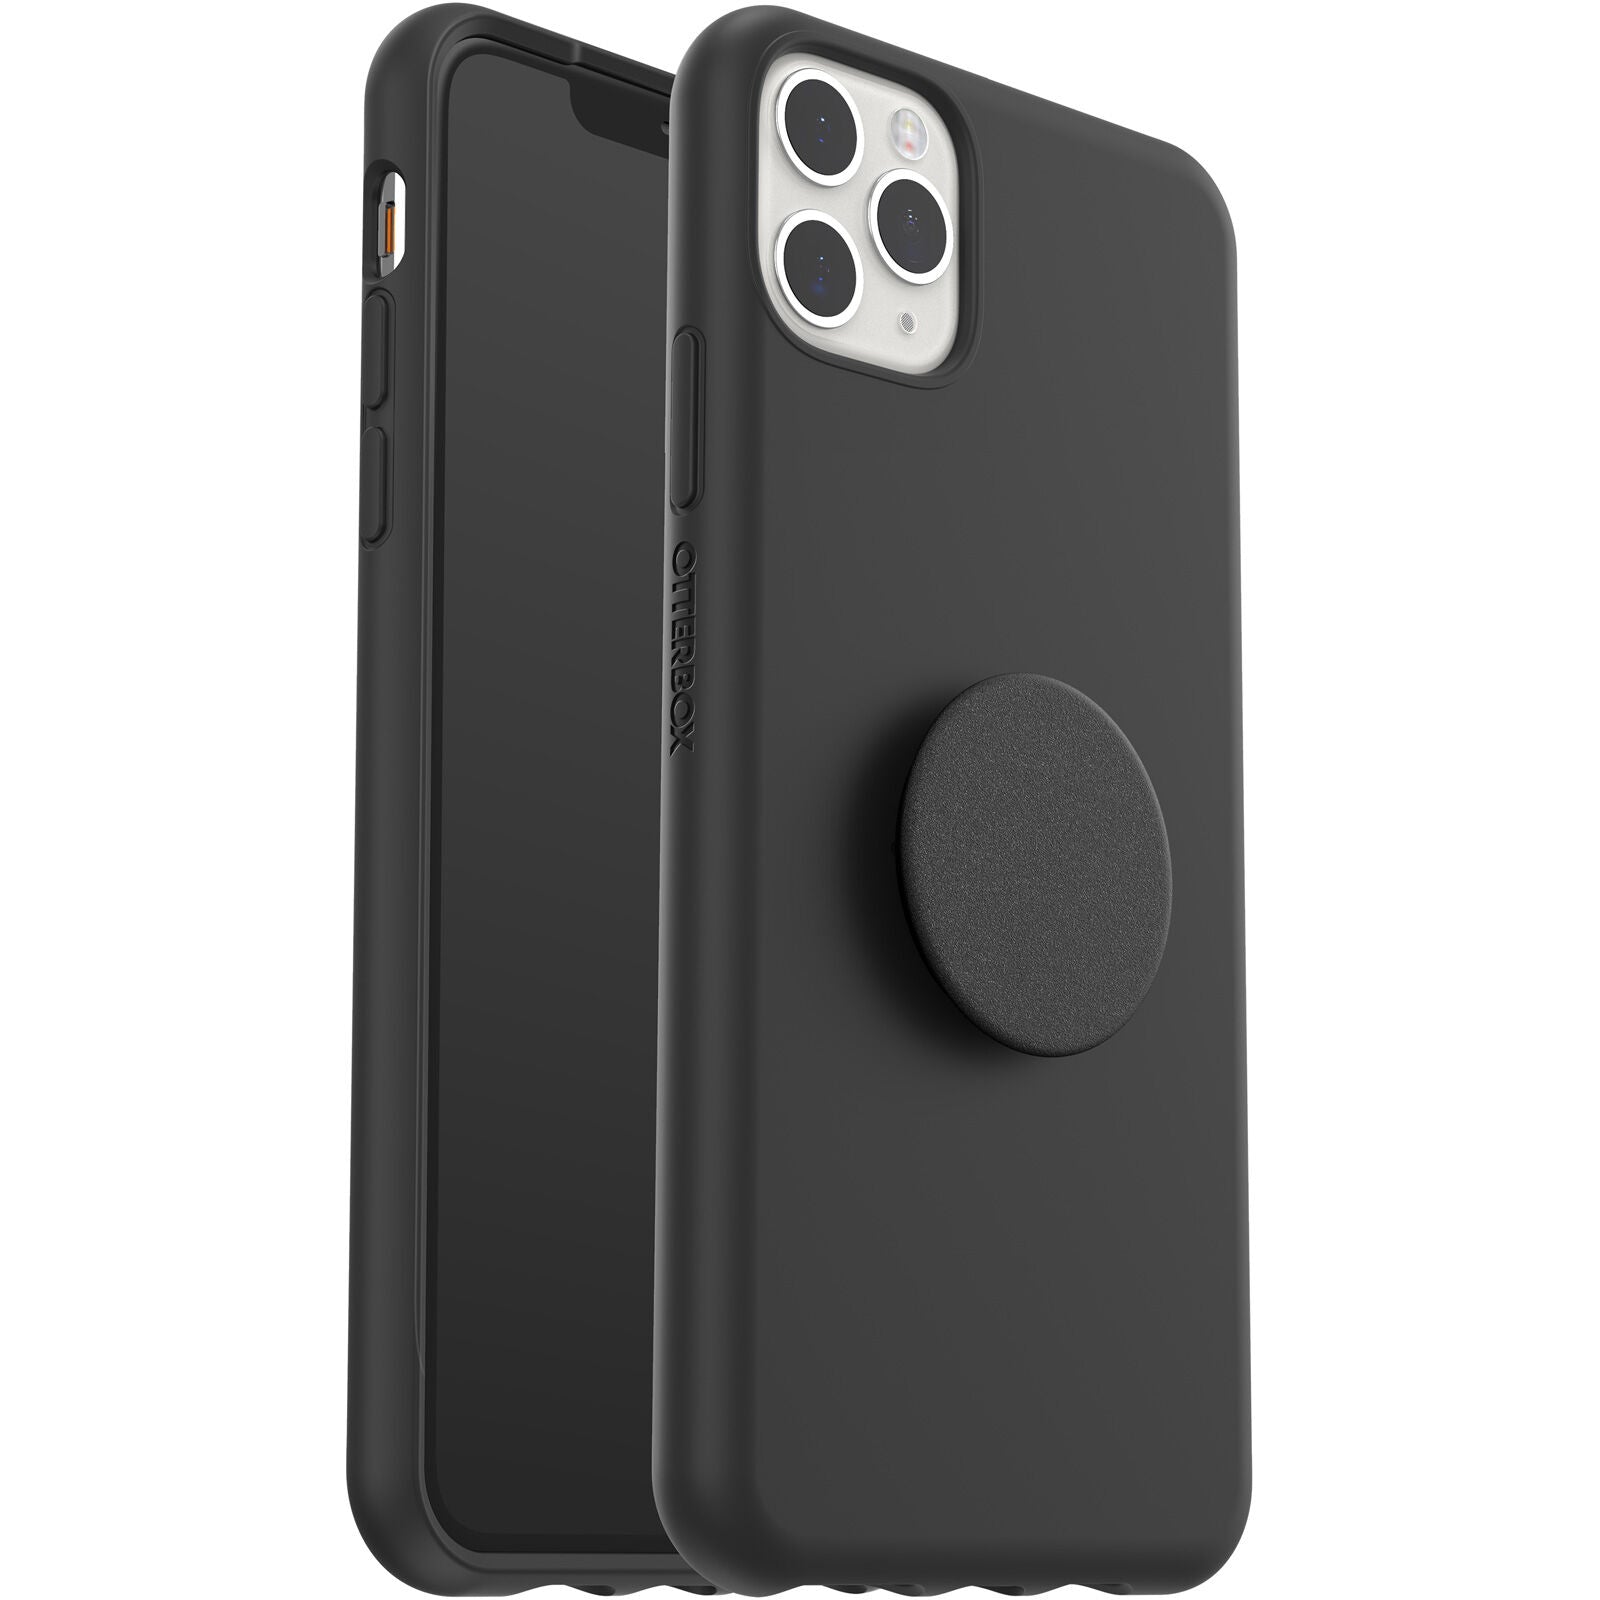 OtterBox + POP Ultra Slim Case for Apple iPhone 11 Pro Max - Black (Certified Refurbished)